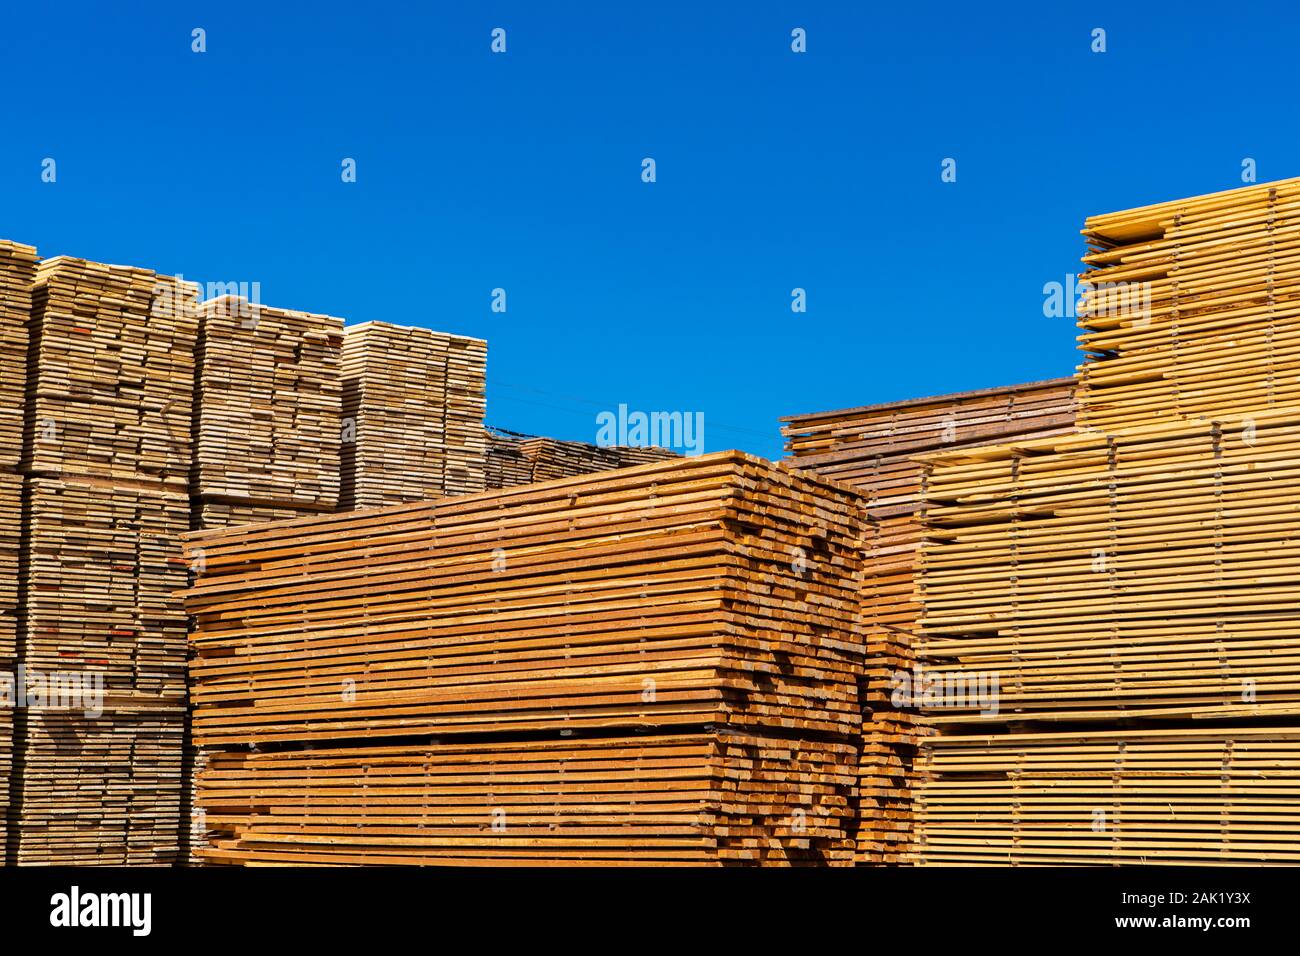 Pallets of treated pine planks are seen stockpiled in a builder merchants yard. Wooden beams and boards beneath a blue sky with copy space. Stock Photo